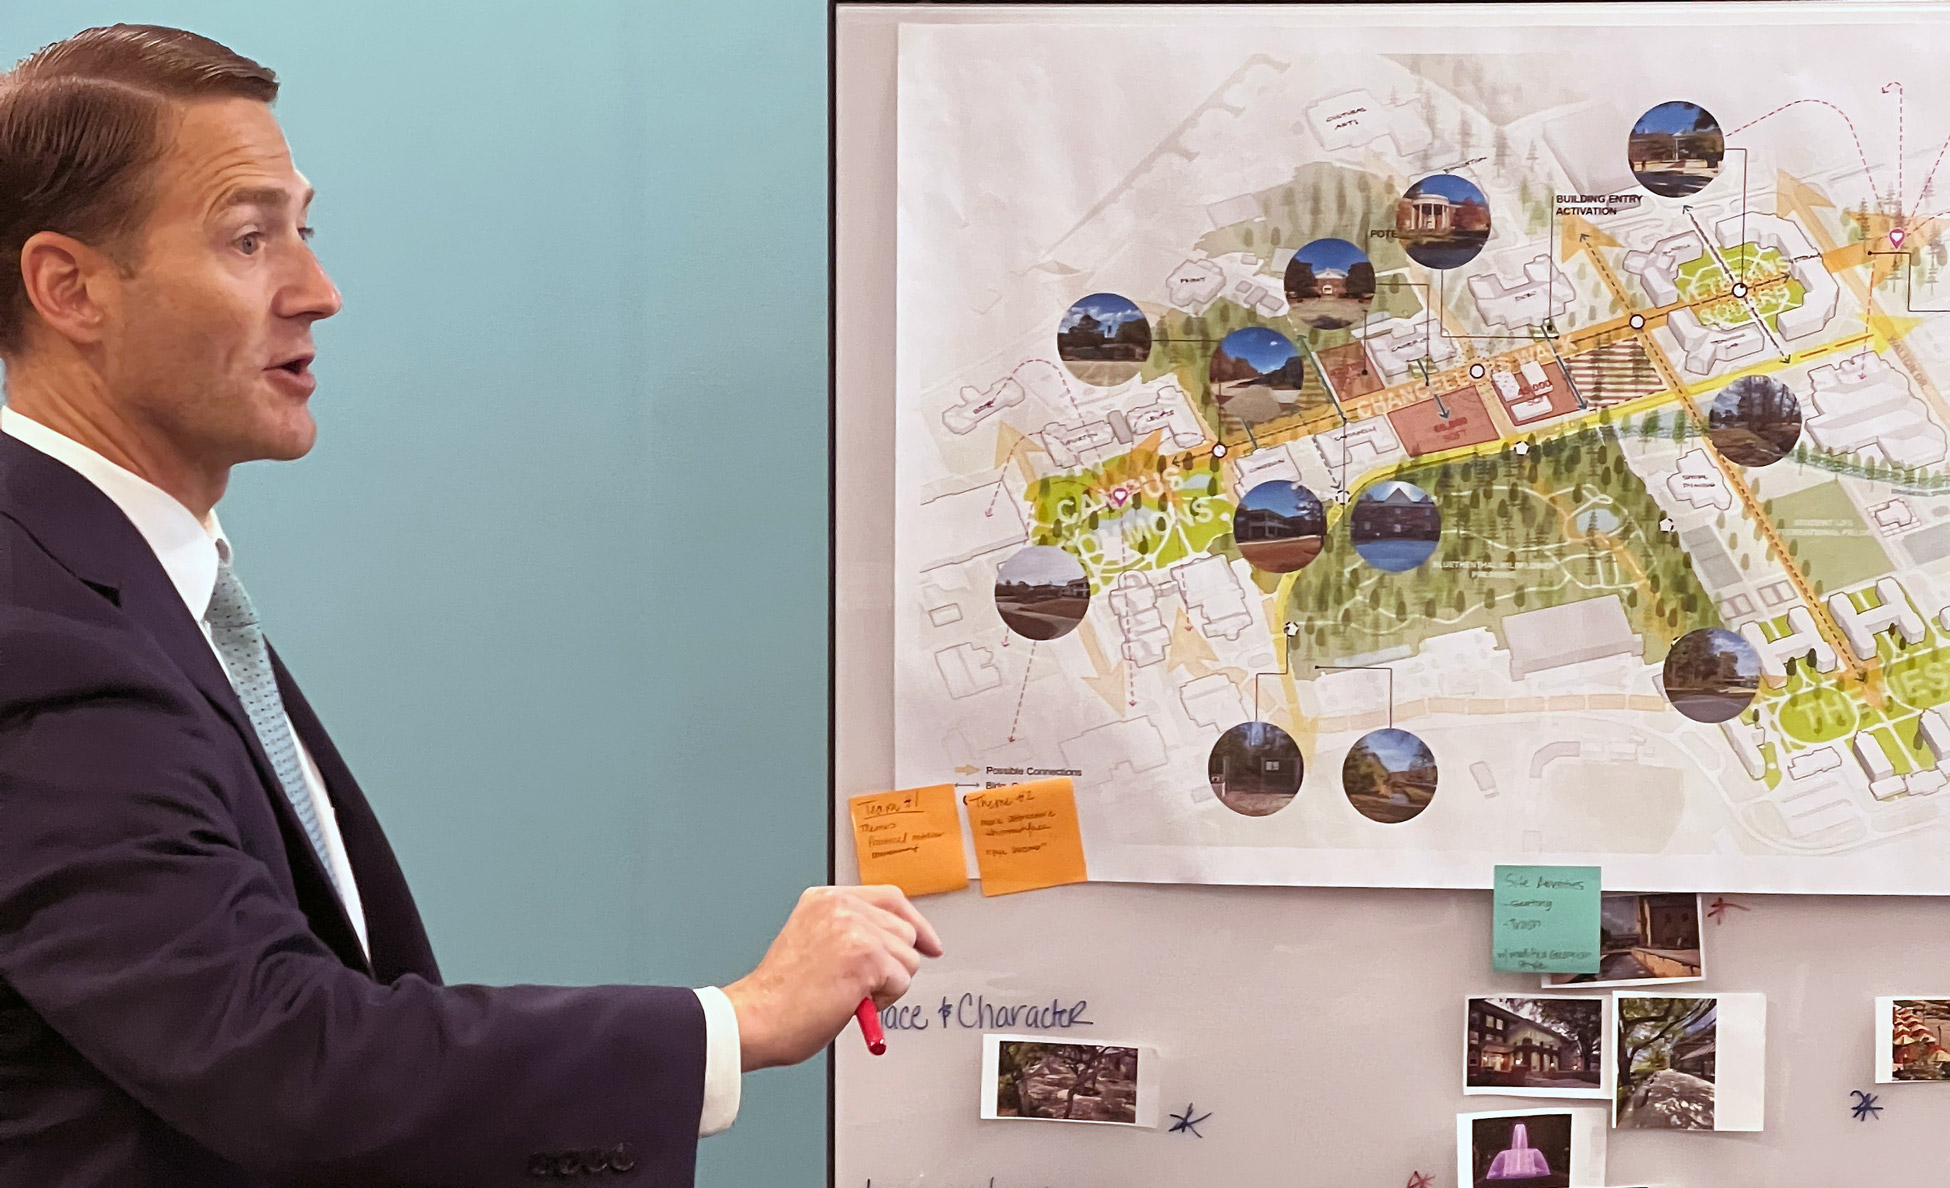 Vice chancellor of business affairs miles lackey discusses the campus master plan